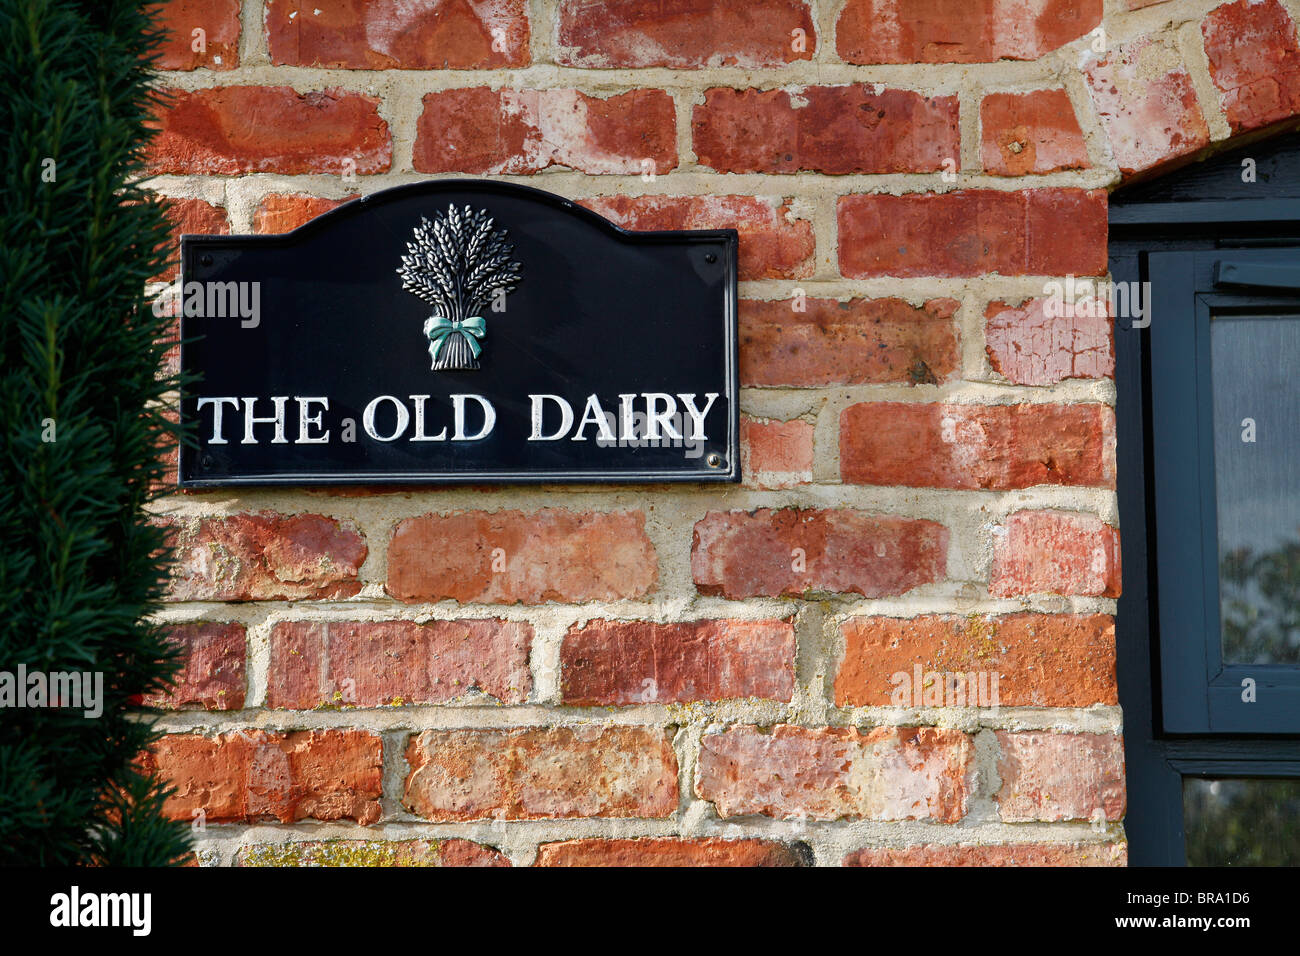 A traditional metal sign for The Old Dairy against a red brick wall Stock Photo